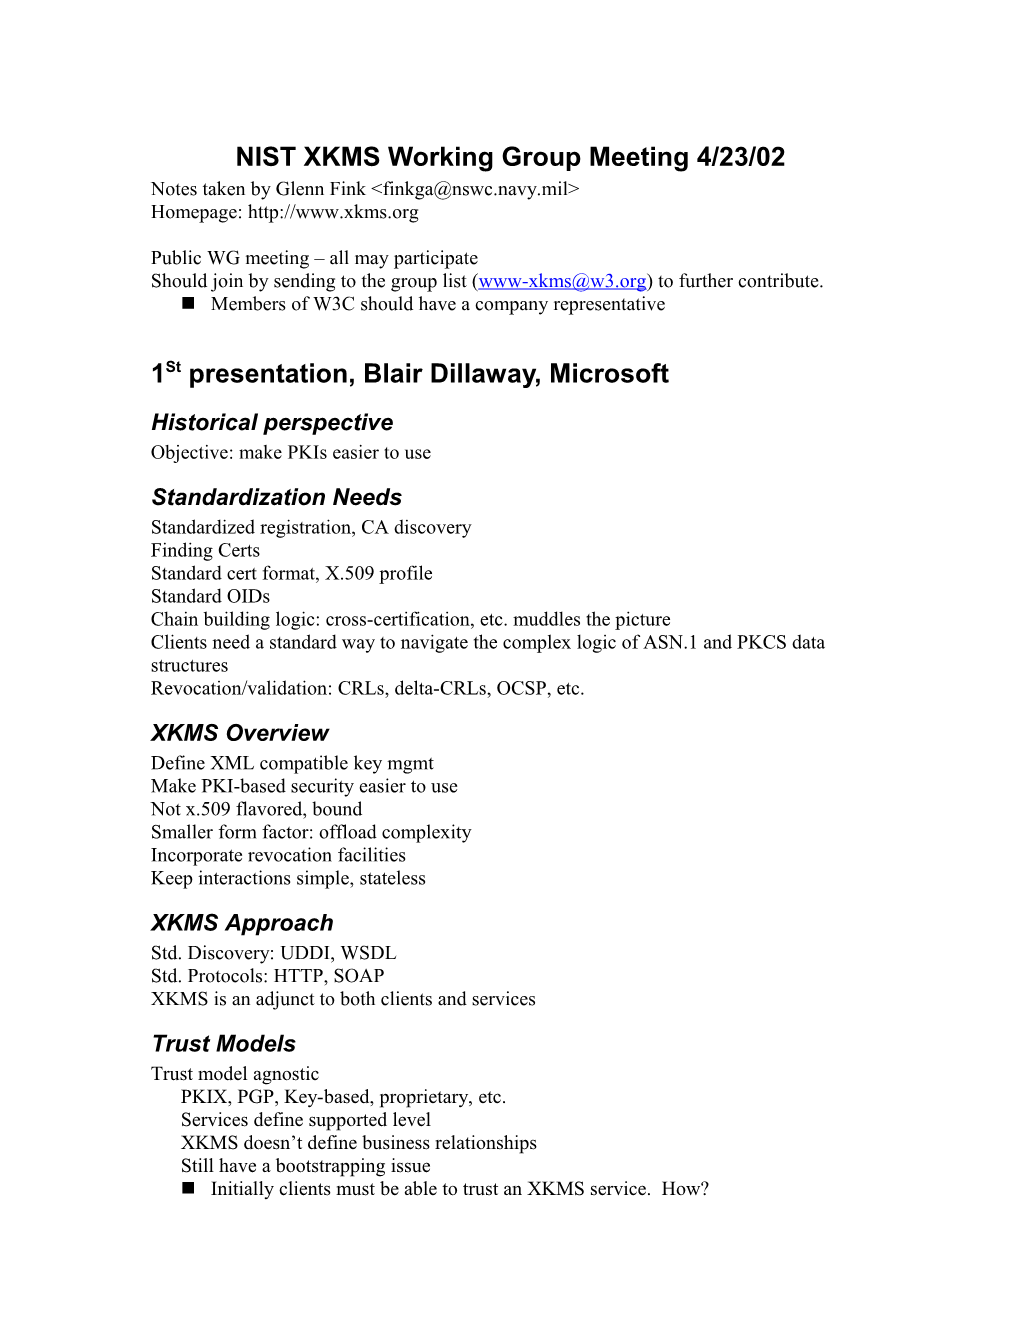 NIST XKMS Working Group Meeting 4/23/02